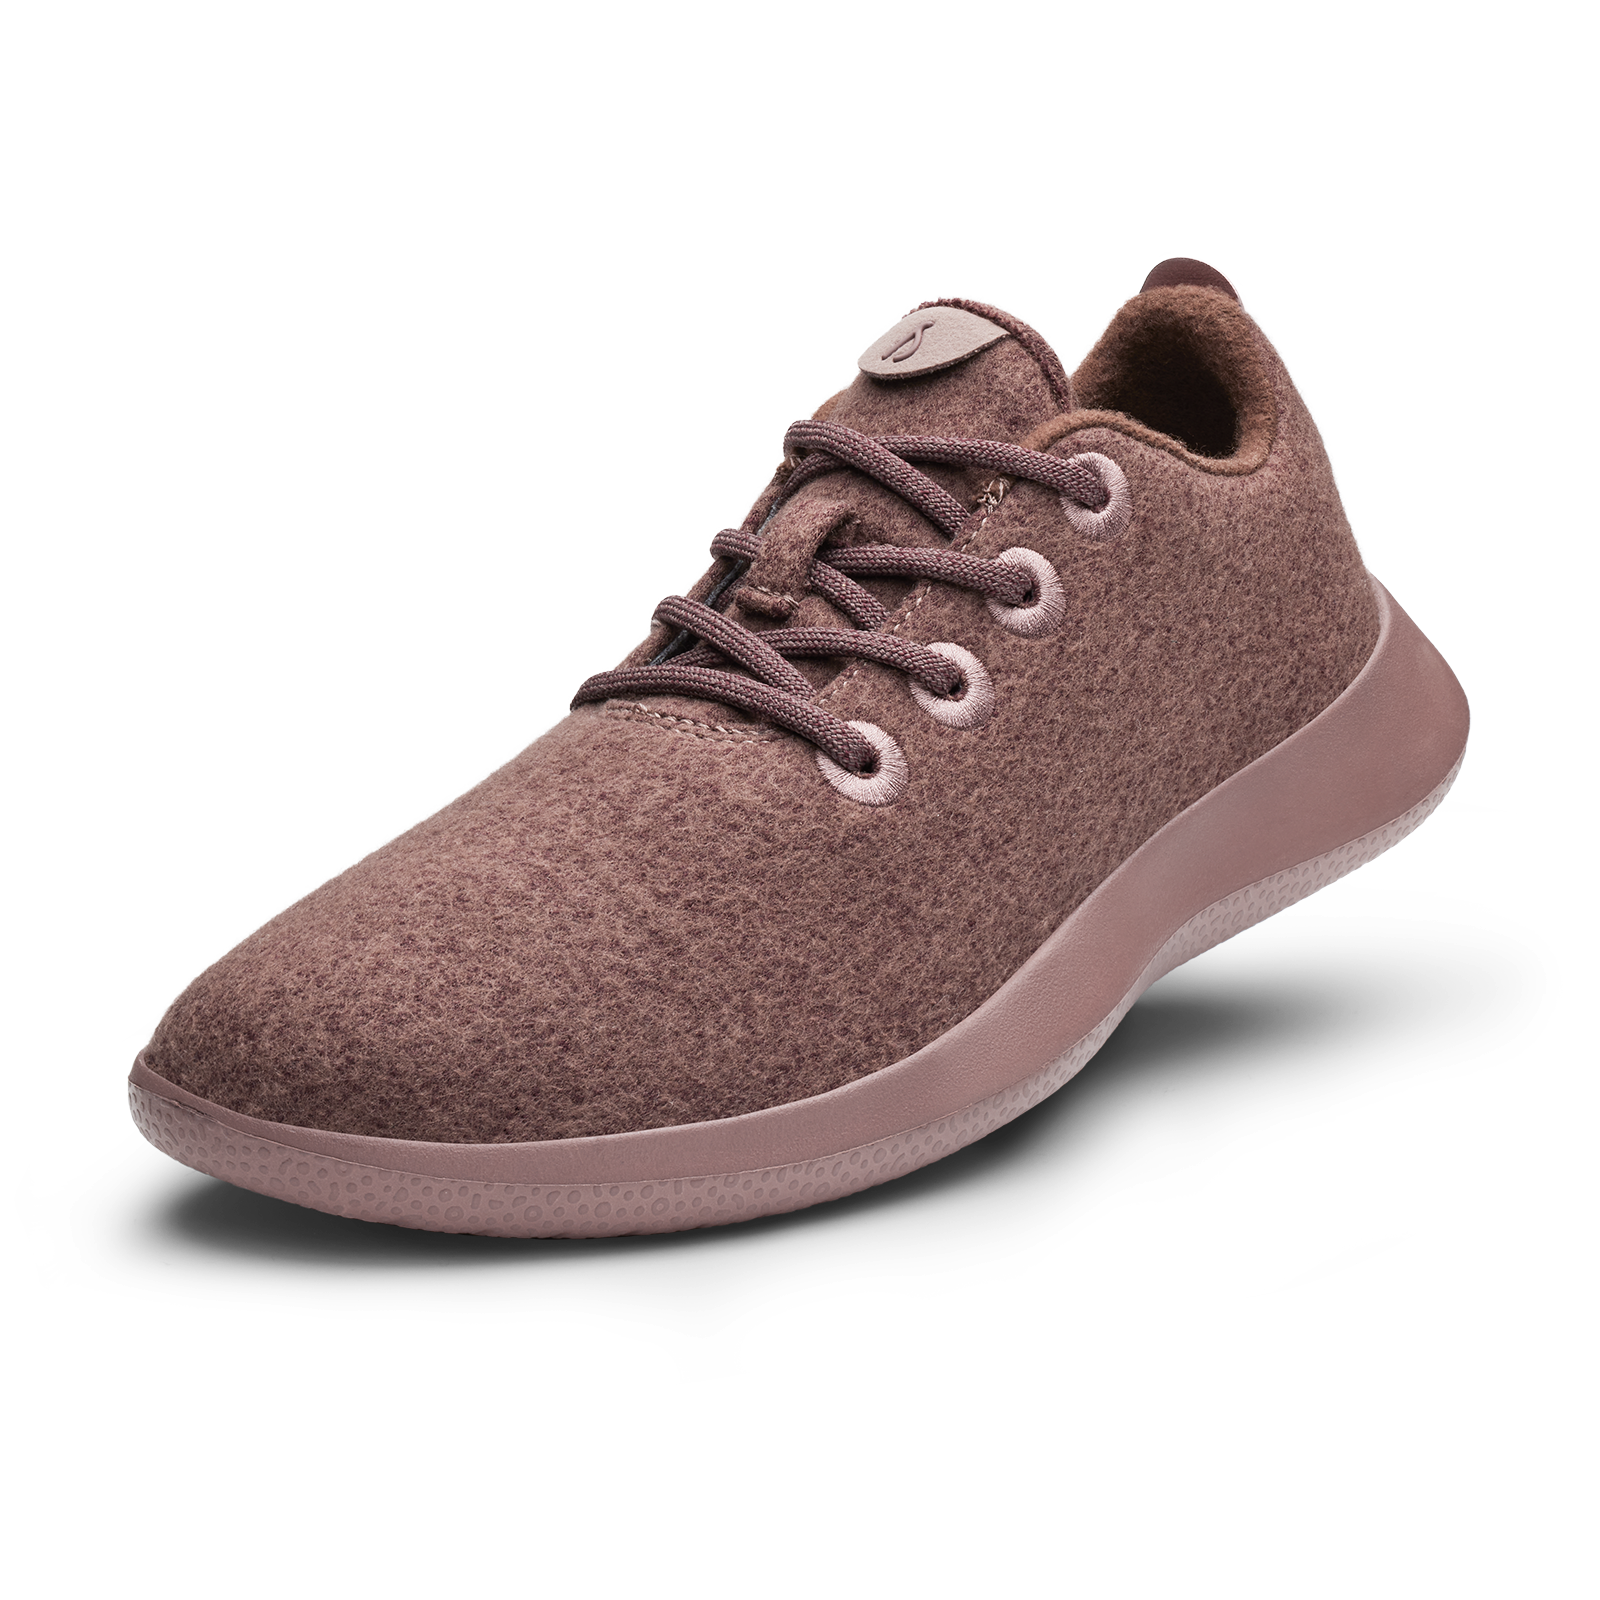 Women's Wool Runners - Stormy Mauve (Stormy Sole)